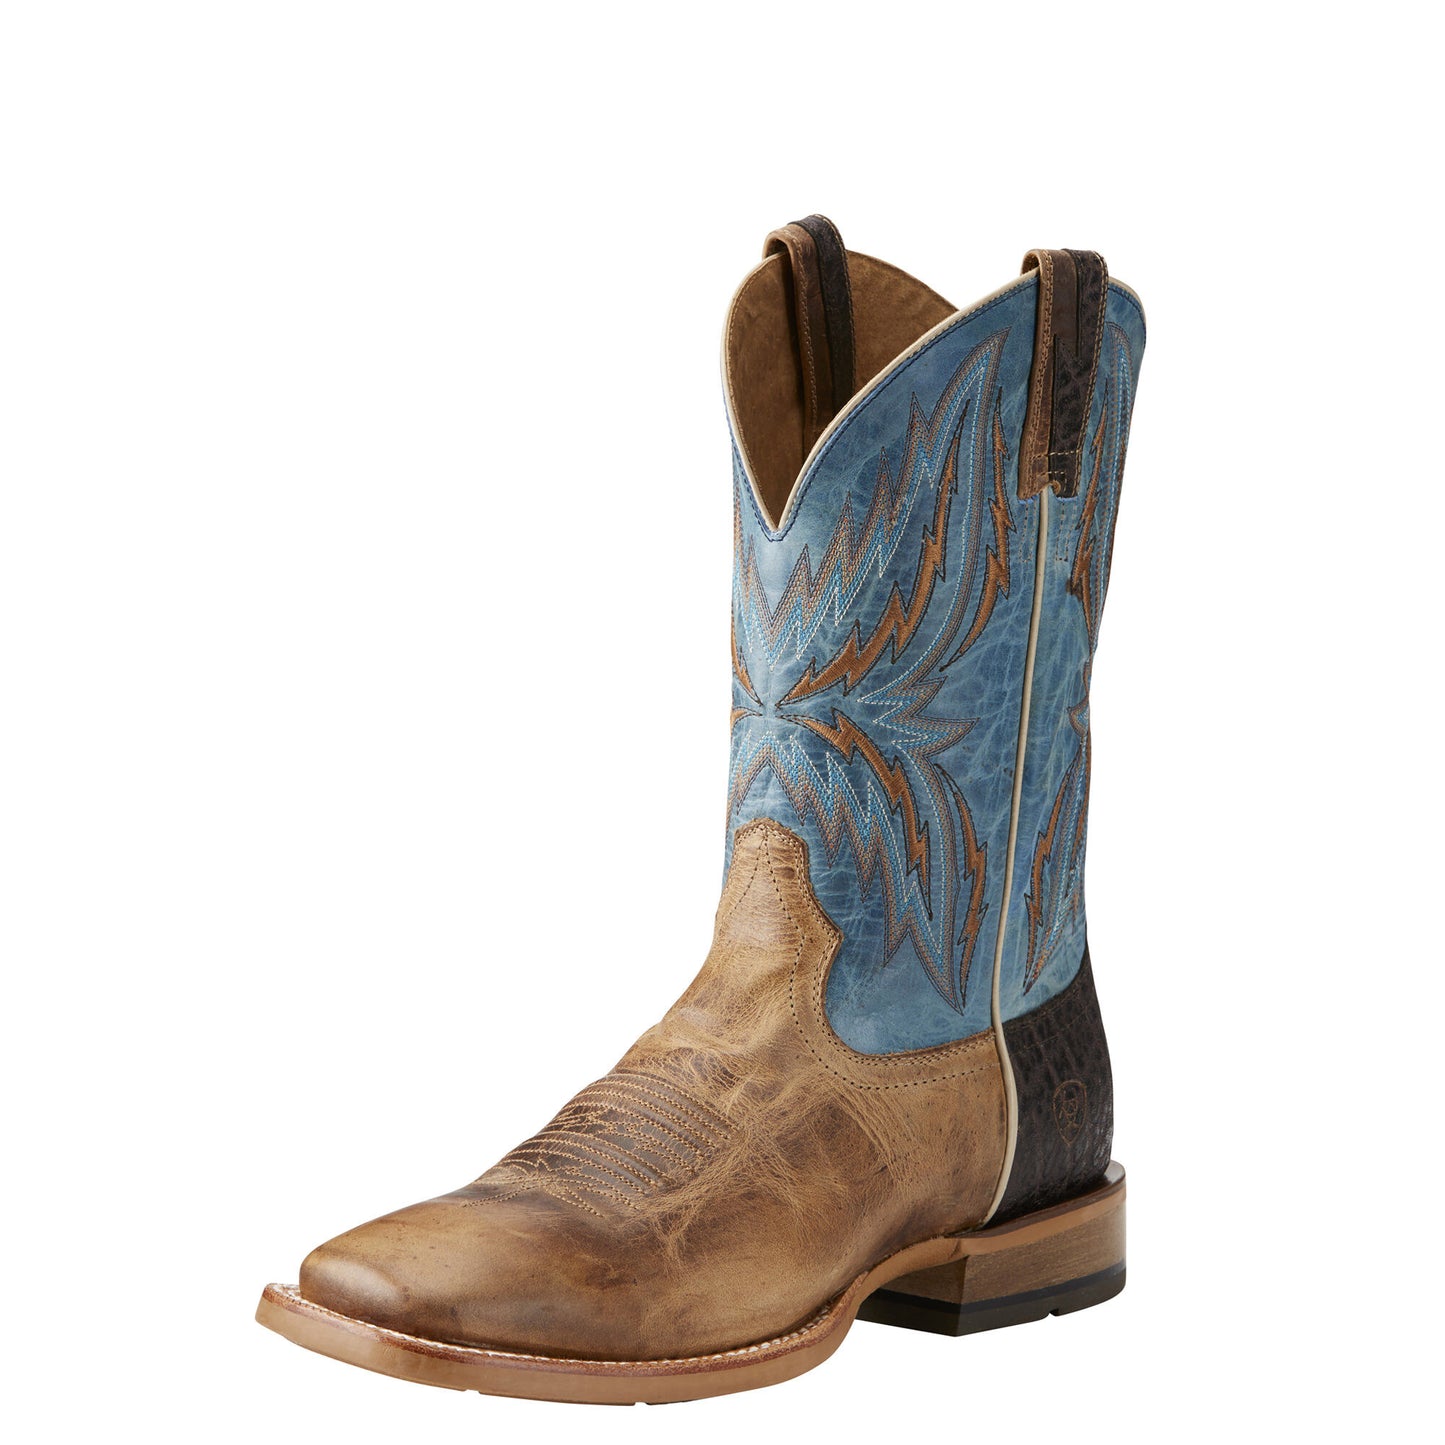 Ariat Men's Arena Rebound Boot - Dusted Wheat/Heritage Blue - French's Boots